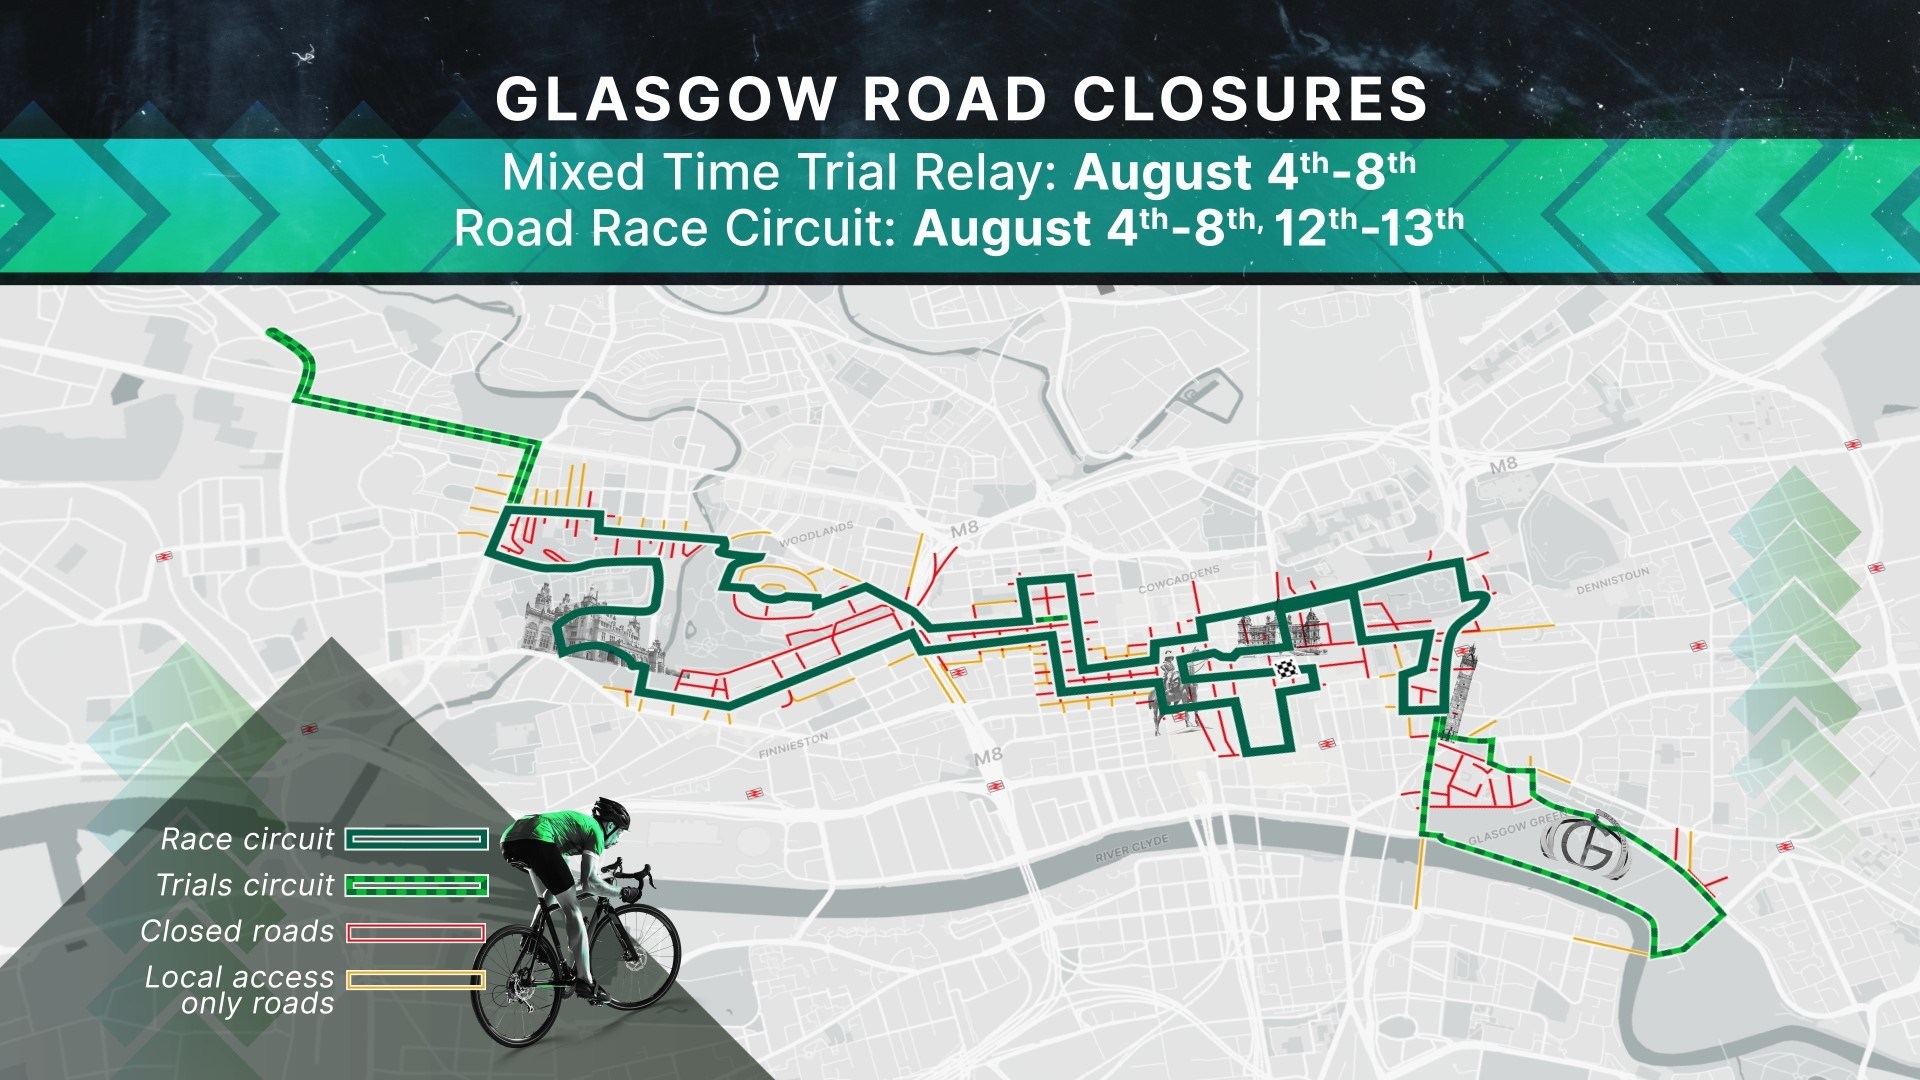 All road closures in Glasgow city centre.